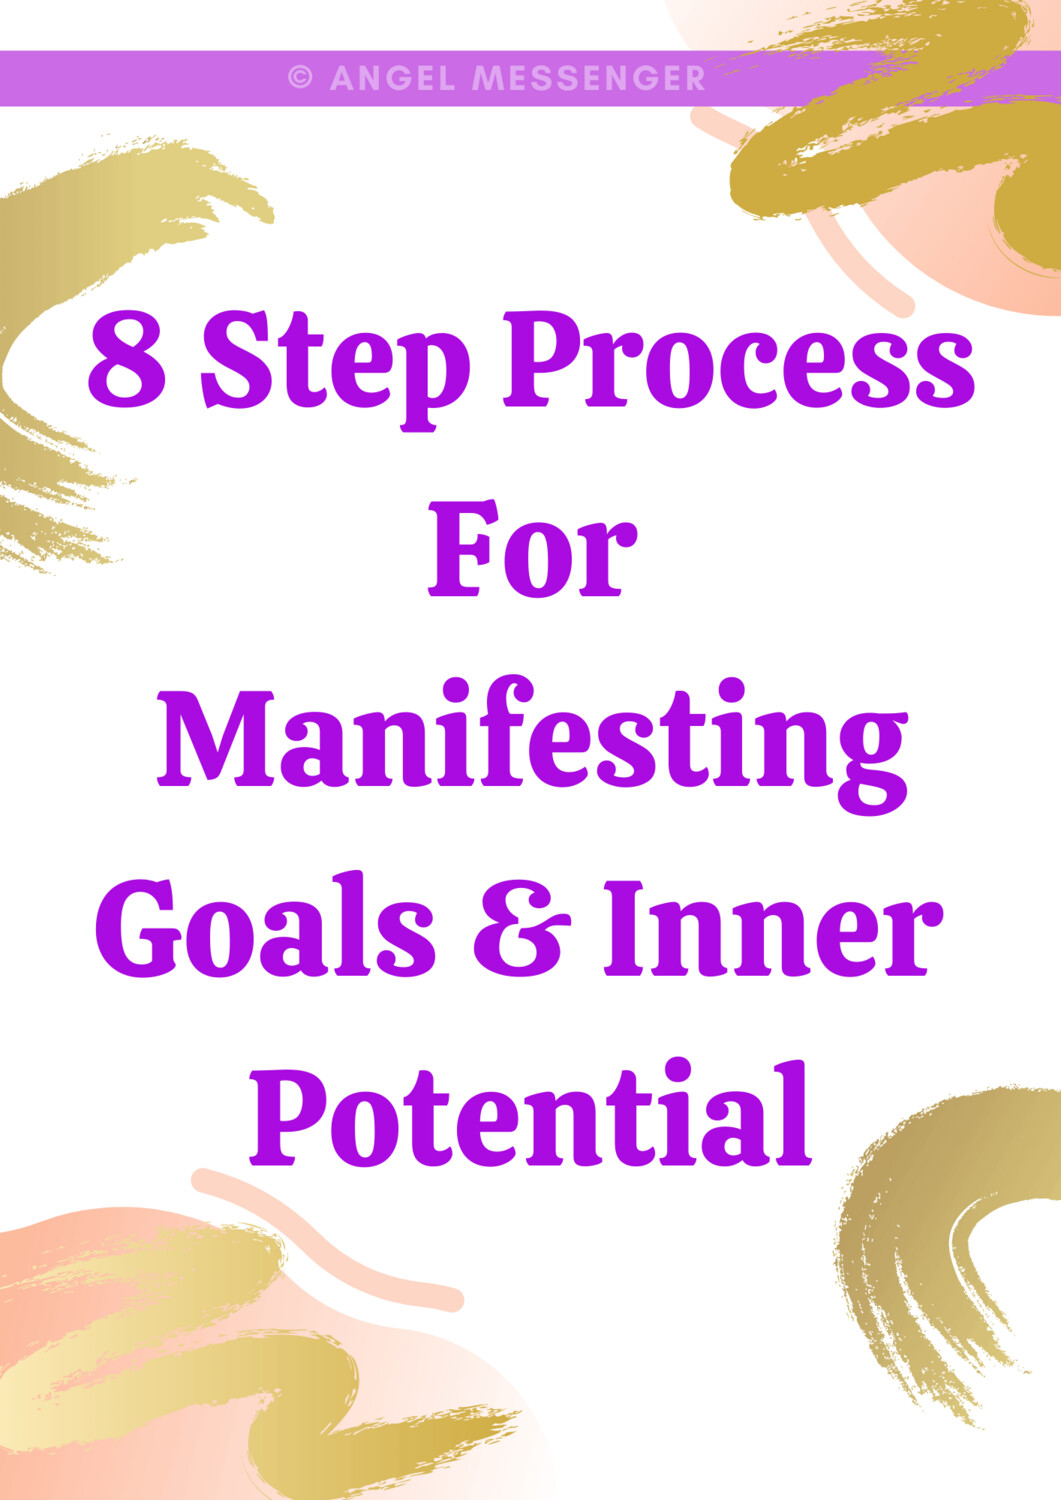 8-Step Process for Manifesting Goals & Inner Potential